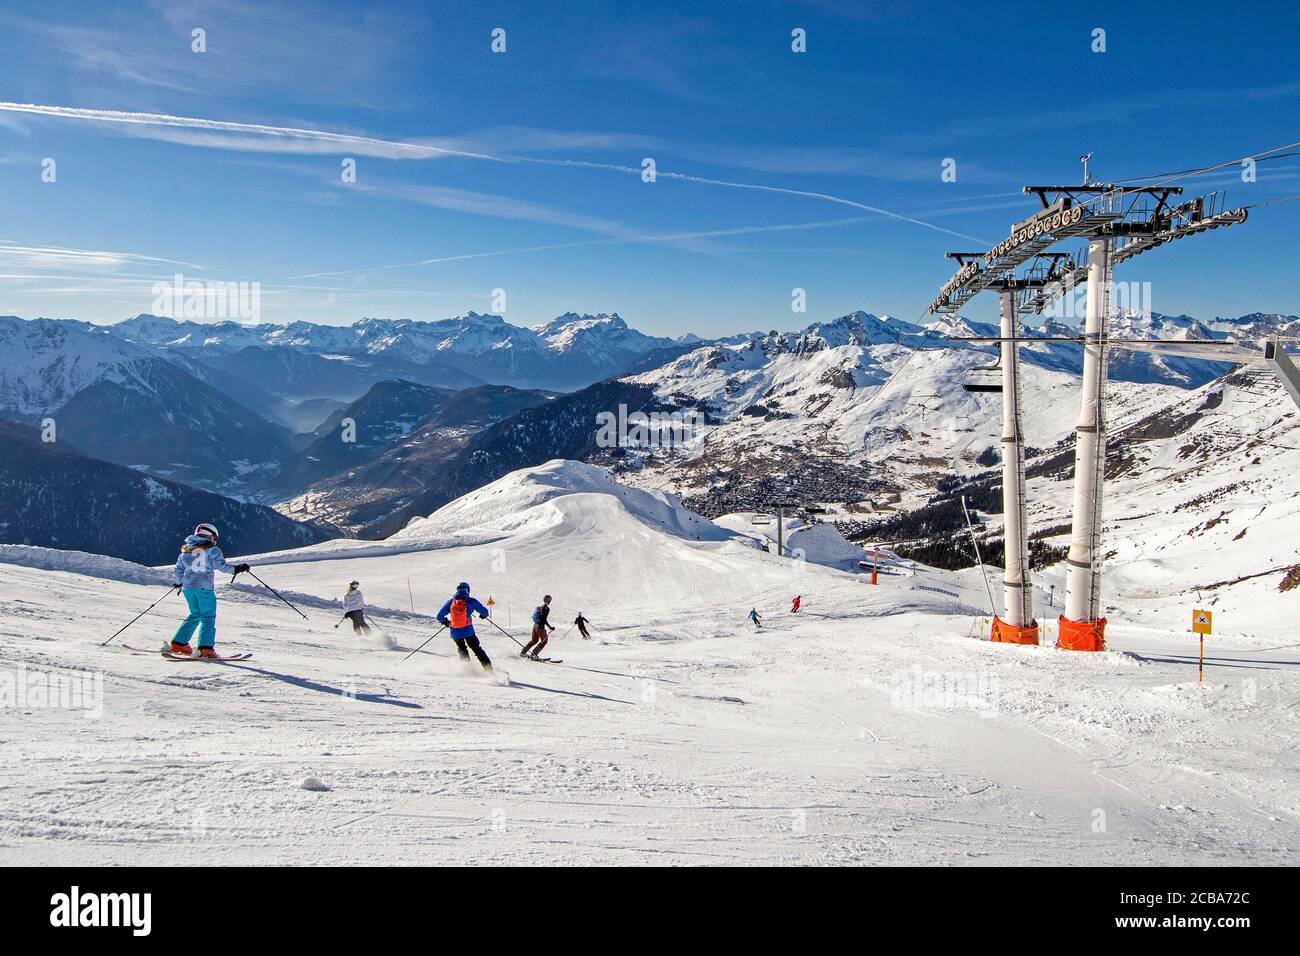 The ski and holiday resort of Verbier located in south-western Switzerland in the canton of Valais. Stock Photo